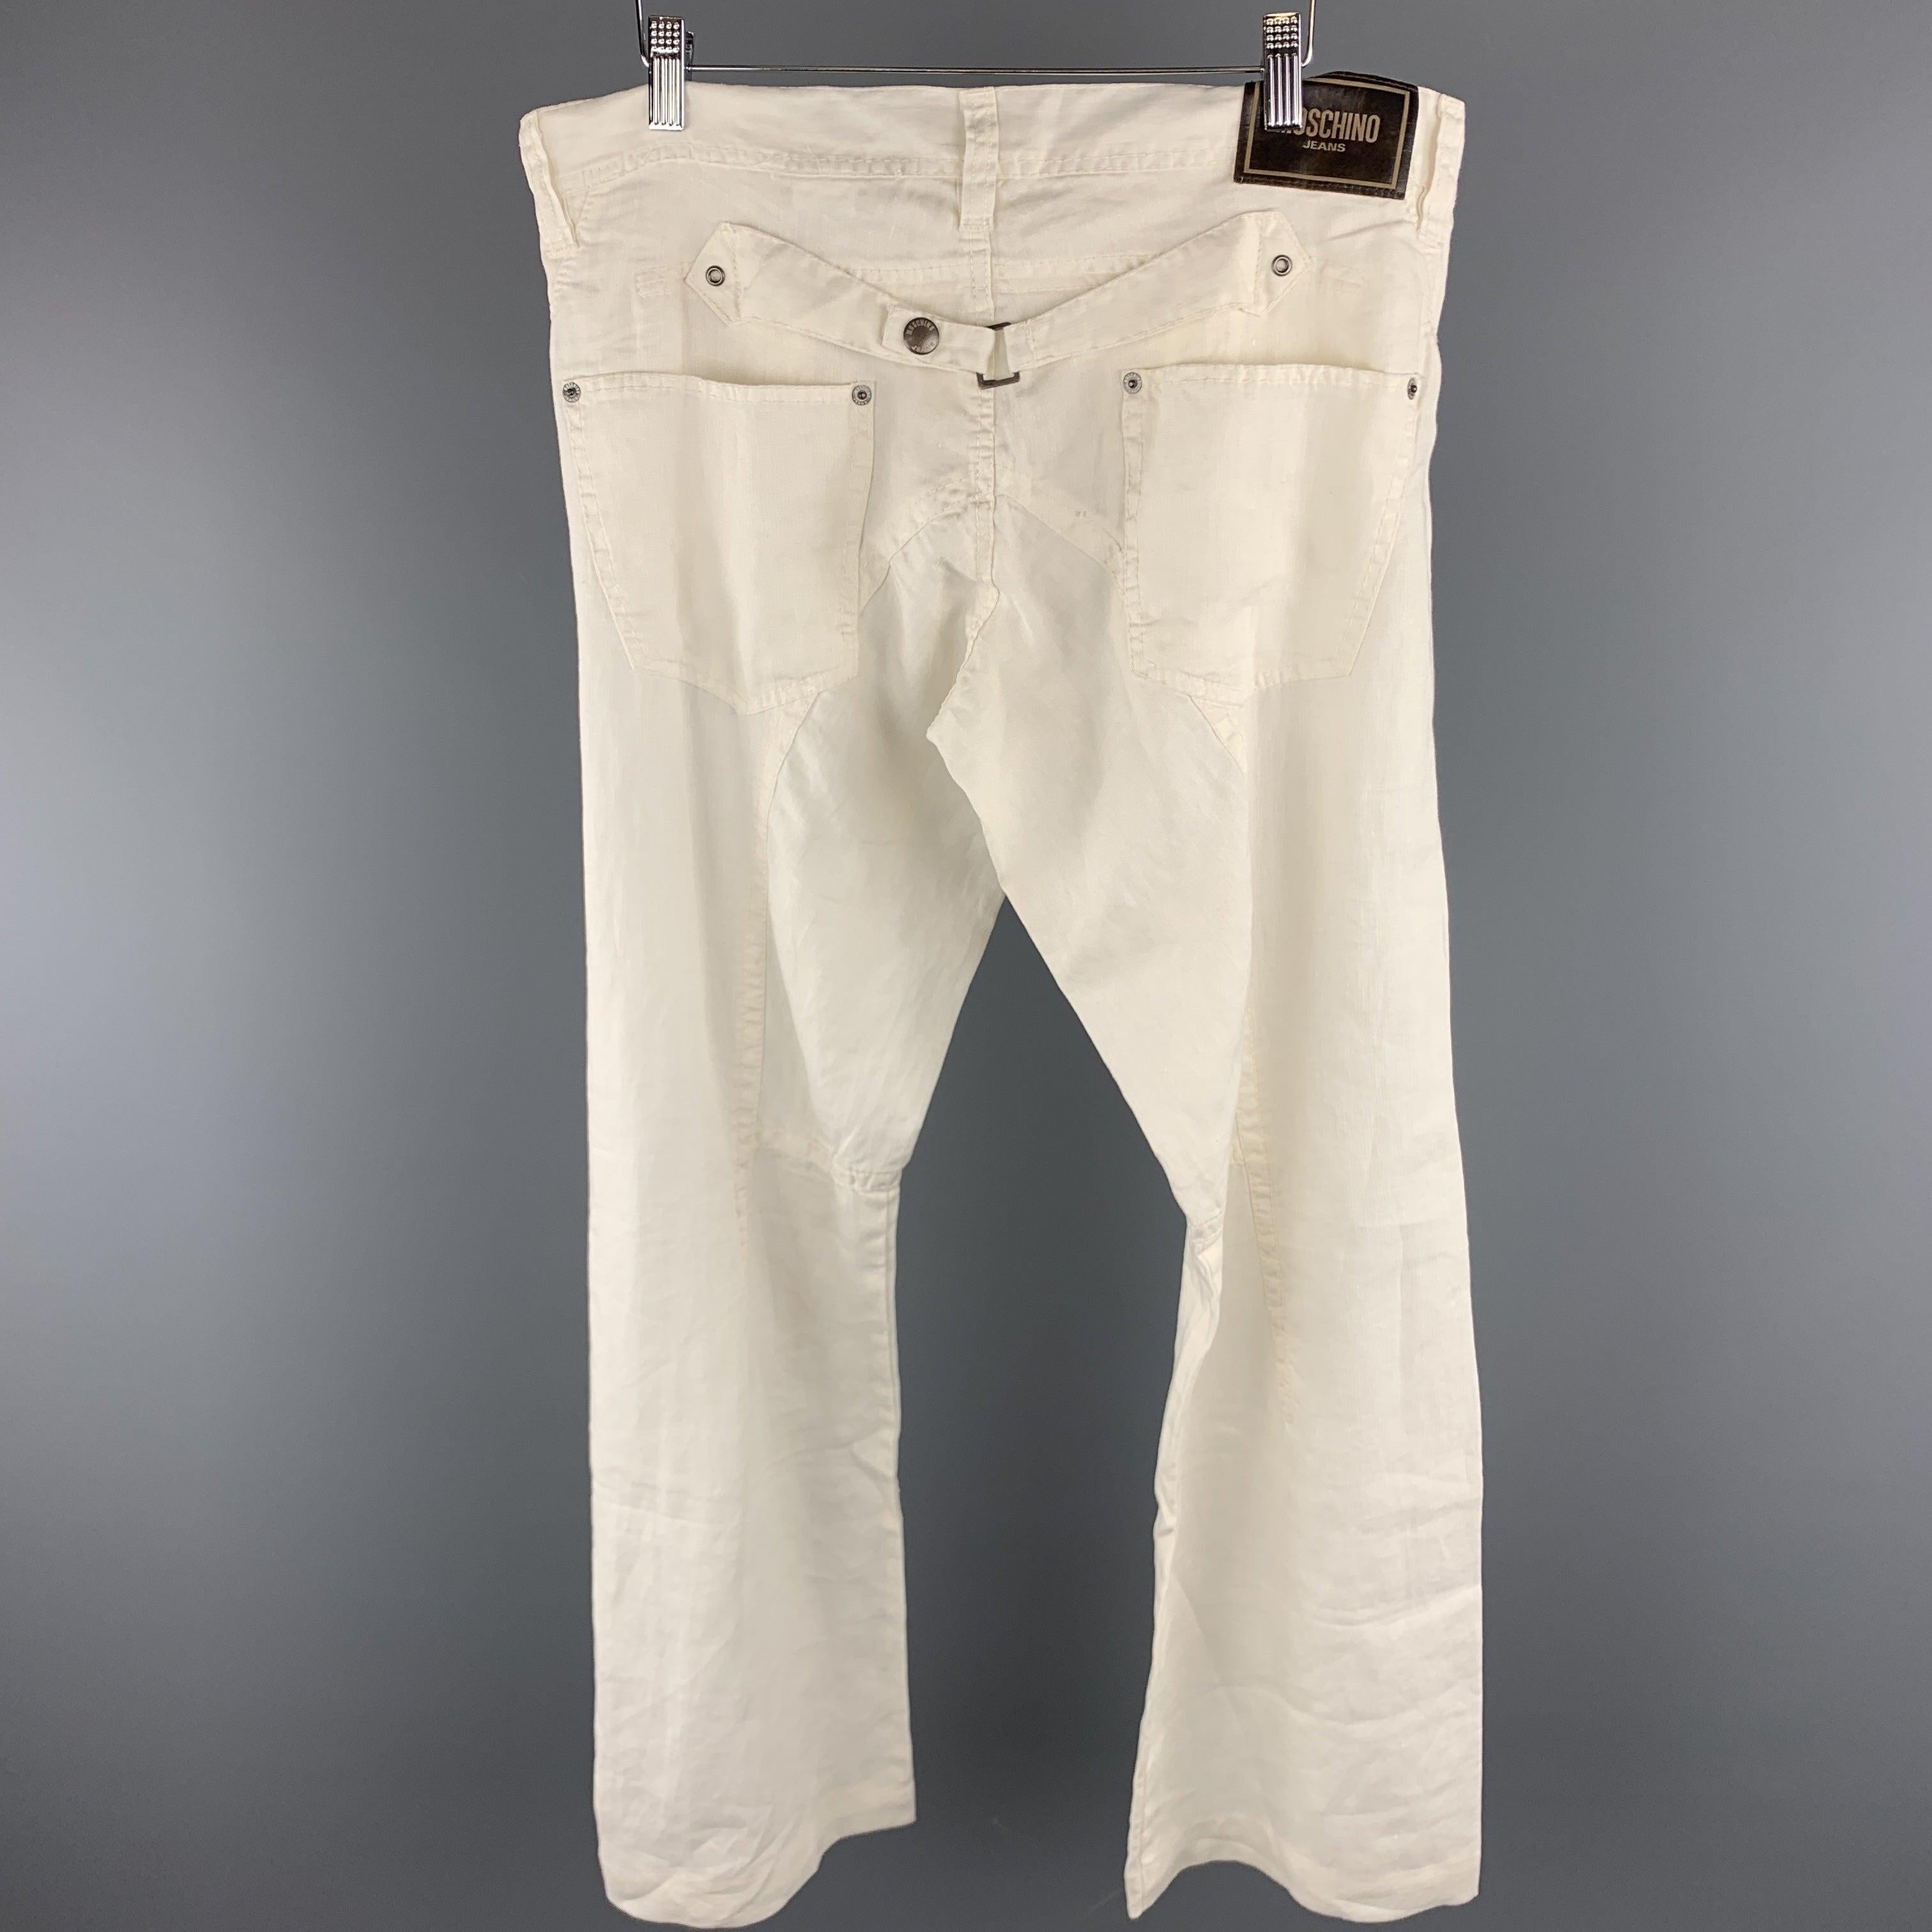 MOSCHINO JEANS comes in a white linen featuring contrast stitching details and a zip fly closure. Comes with tags.
Very Good
Pre-Owned Condition. 

Marked:   32 

Measurements: 
  Waist: 32 inches 
Rise: 7.5 inches 
Inseam: 31 inches 
  
  
